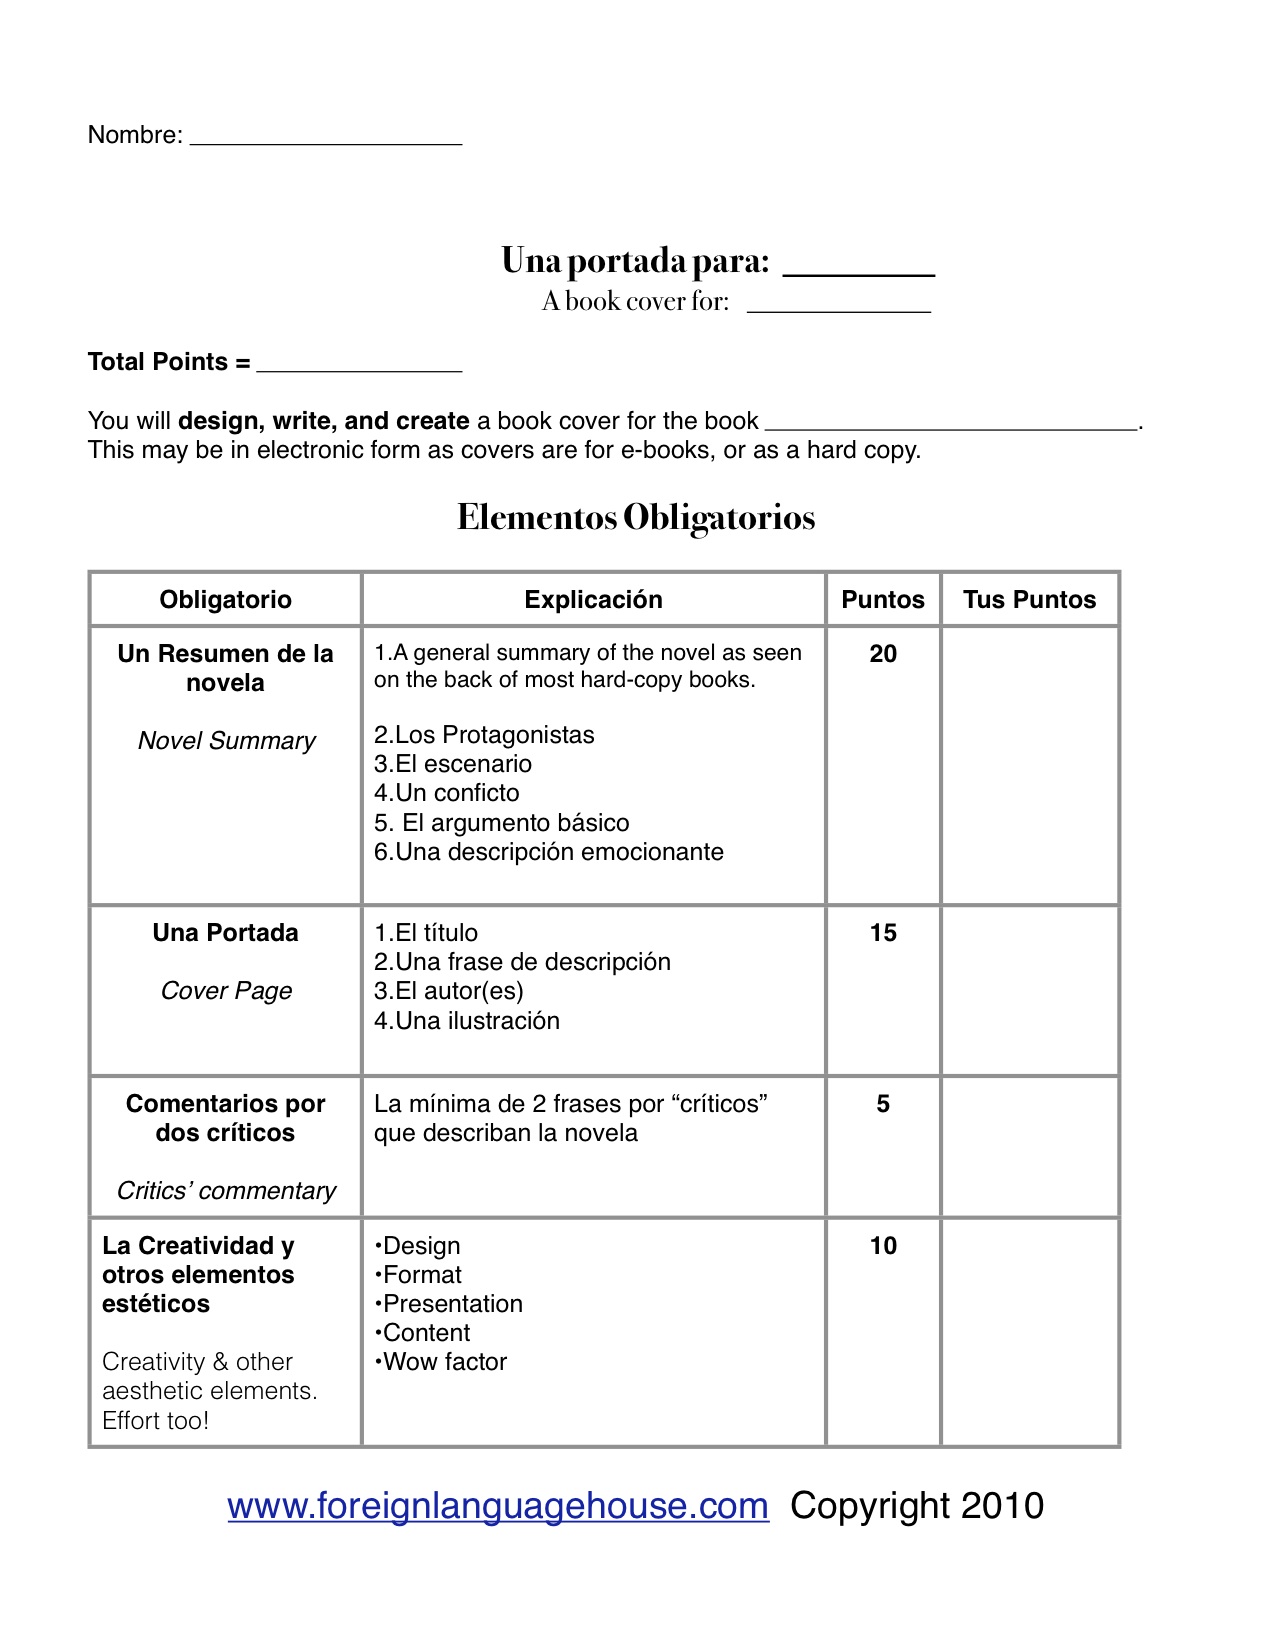 14-best-images-of-january-book-report-worksheets-spanish-worksheets-for-middle-school-students